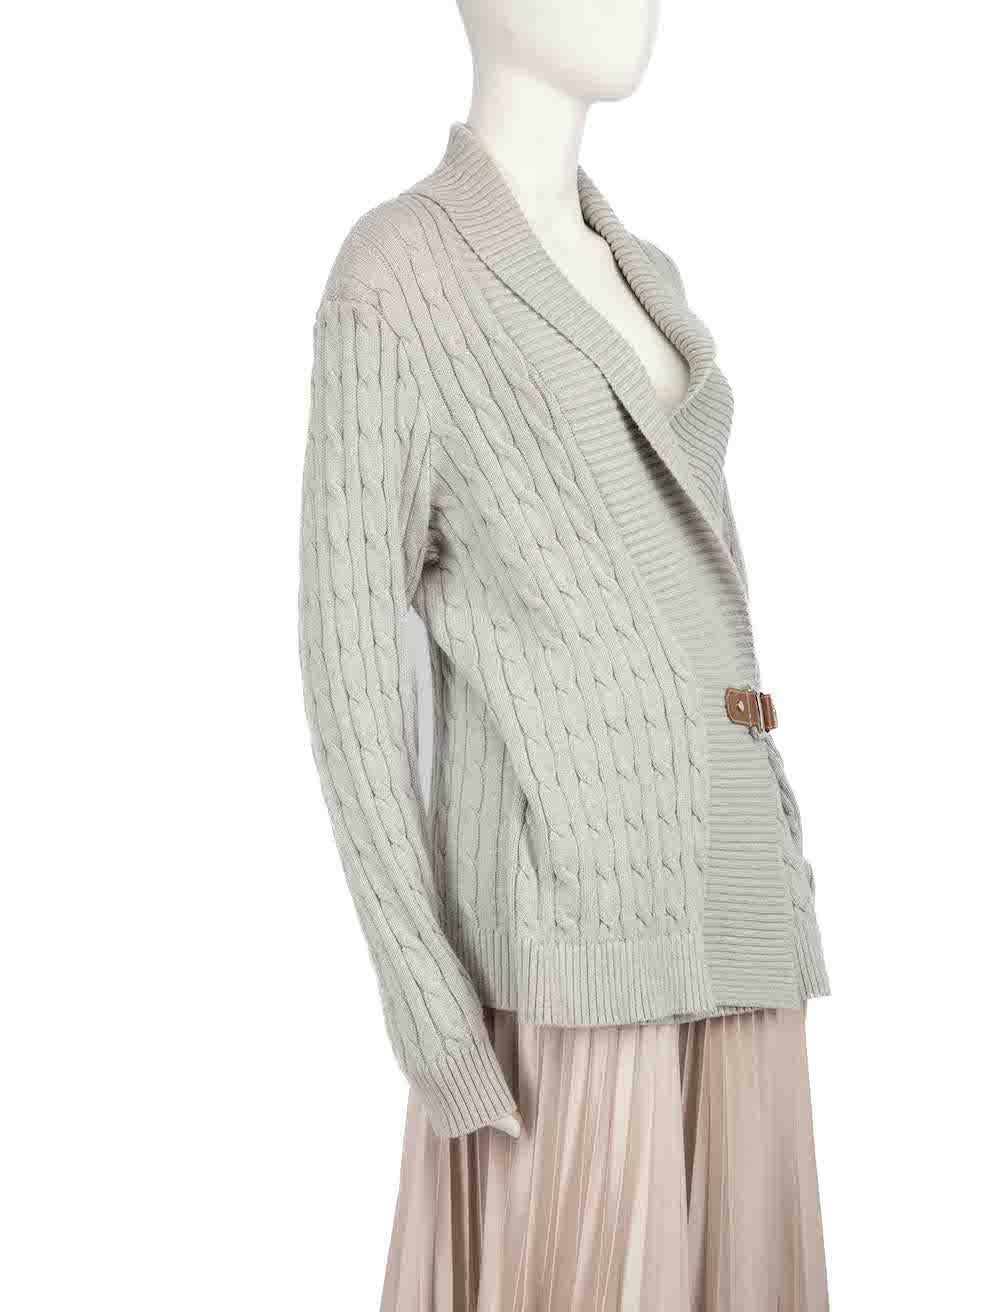 CONDITION is Very good. Minor wear to cardigan is evident. Some slight discolouration to the sleeve edges and some minor scratches to the metal hardware on this used Lauren by Ralph Lauren designer resale item.
 
 Details
 Grey
 Cotton
 Knit wrap